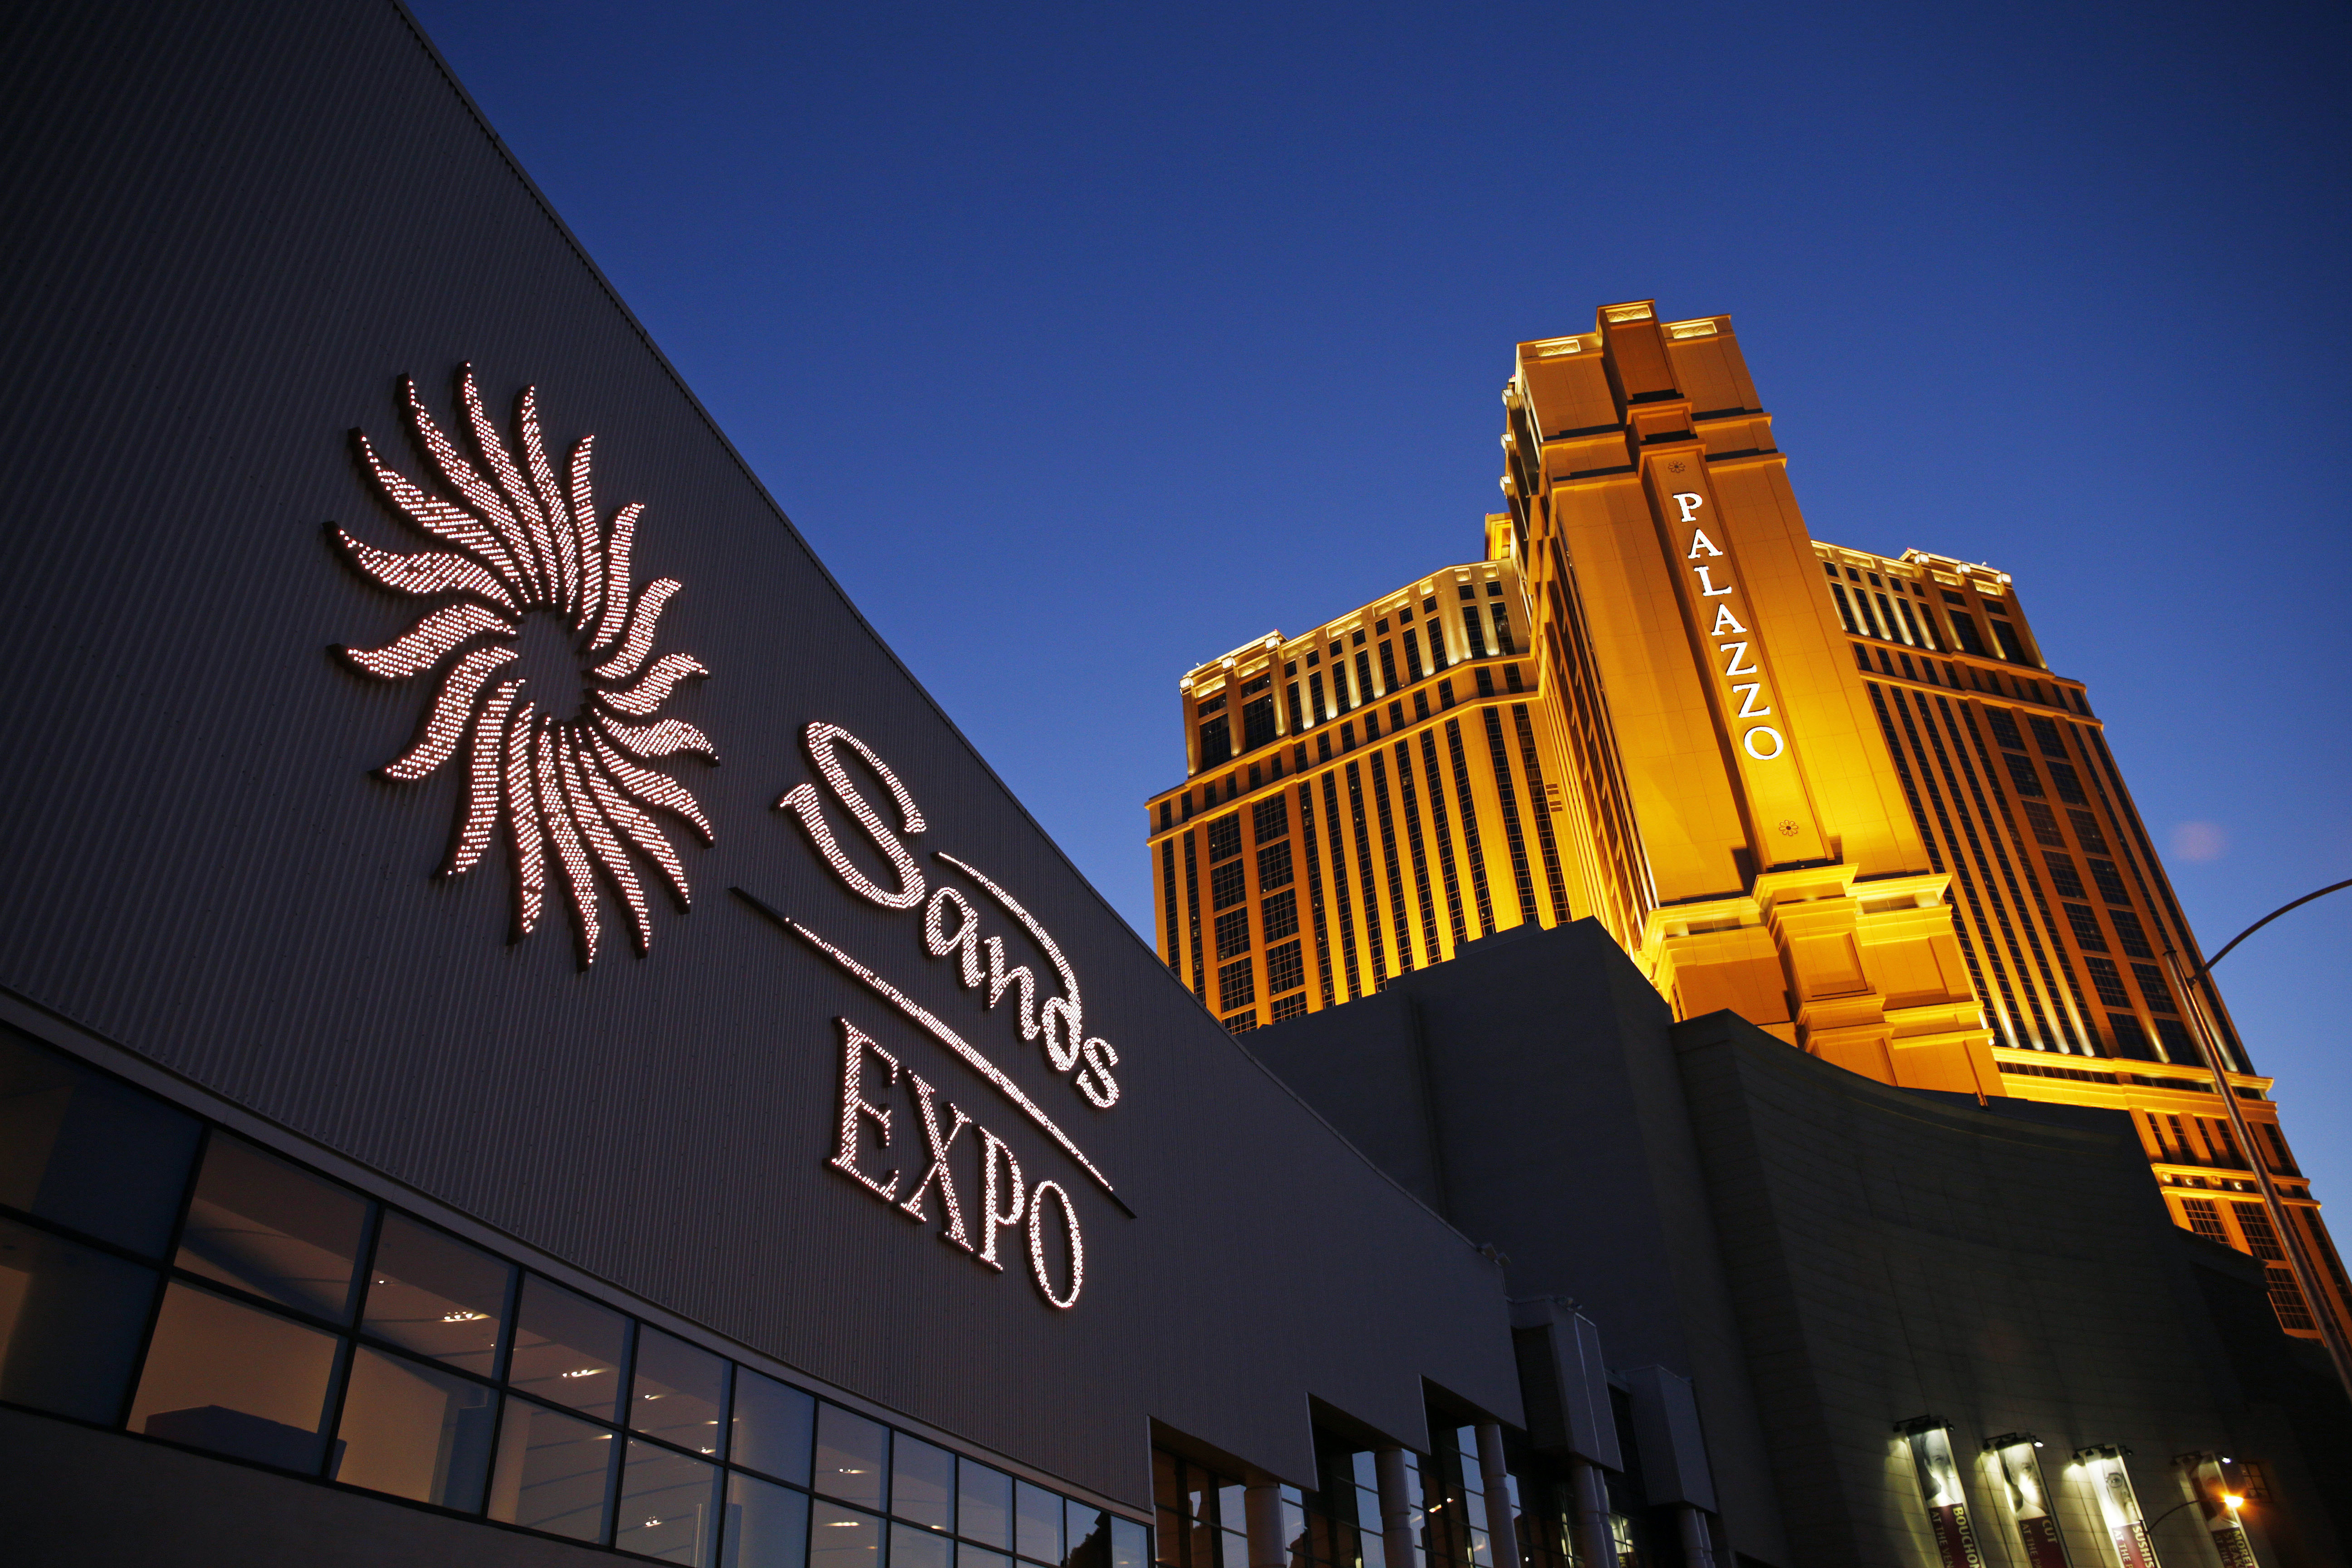 The Venetian Expo is new name for Sands Expo & Convention Center, Conventions